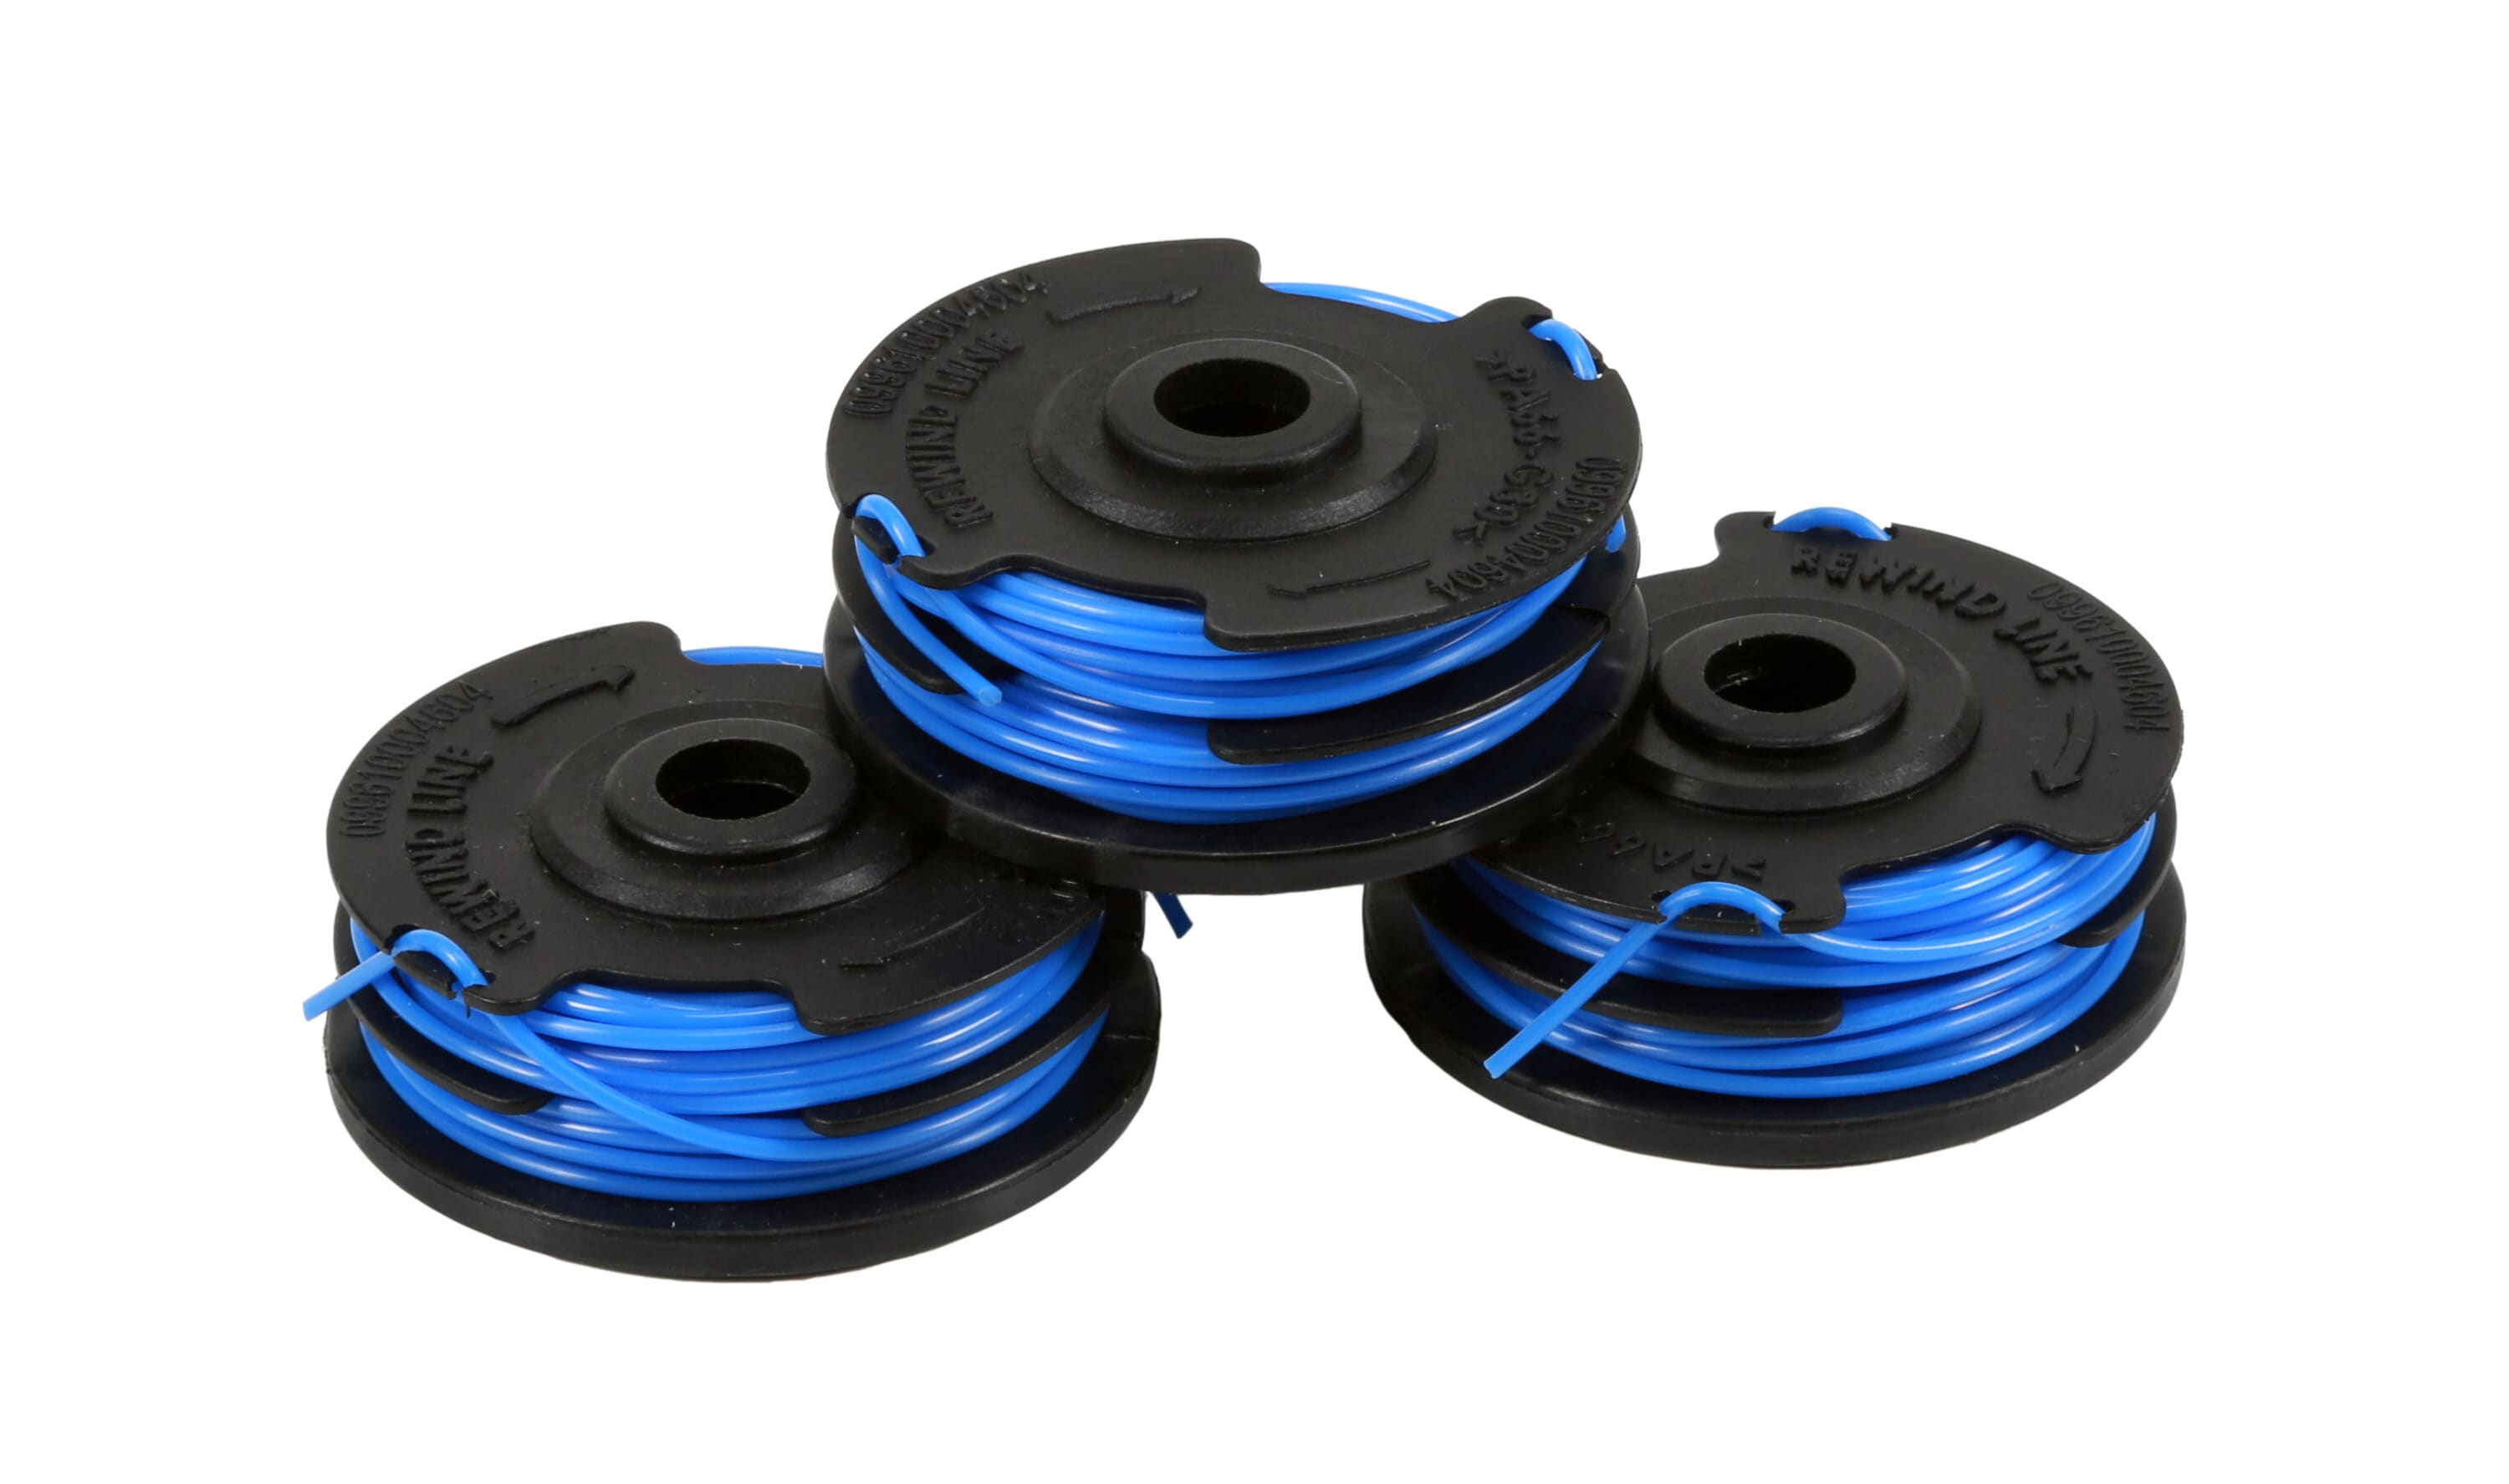 Line String Trimmer Replacement Spool, 30ft 0.065 inch Autofeed Replacement Spools Compatible with Black+decker String Trimmers (3-Line Spool)